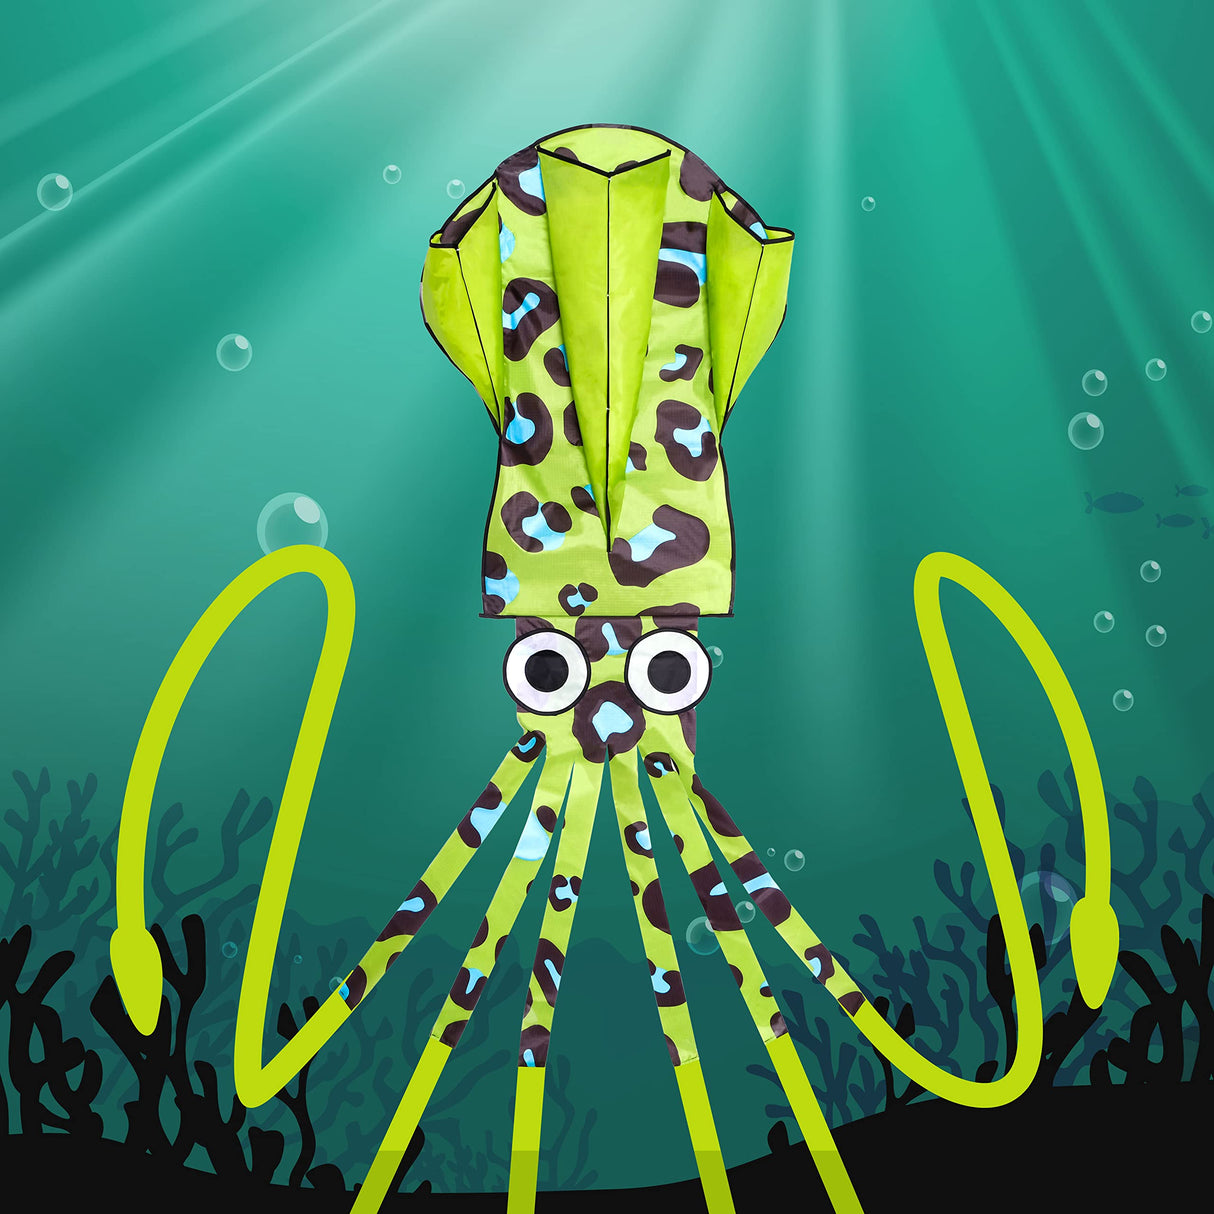 JEKOSEN Octopus Squid Huge Kite, with Total Length of 242" Easy to Fly Suitable for Children and Adults Beach Park Activities - GexWorldwide